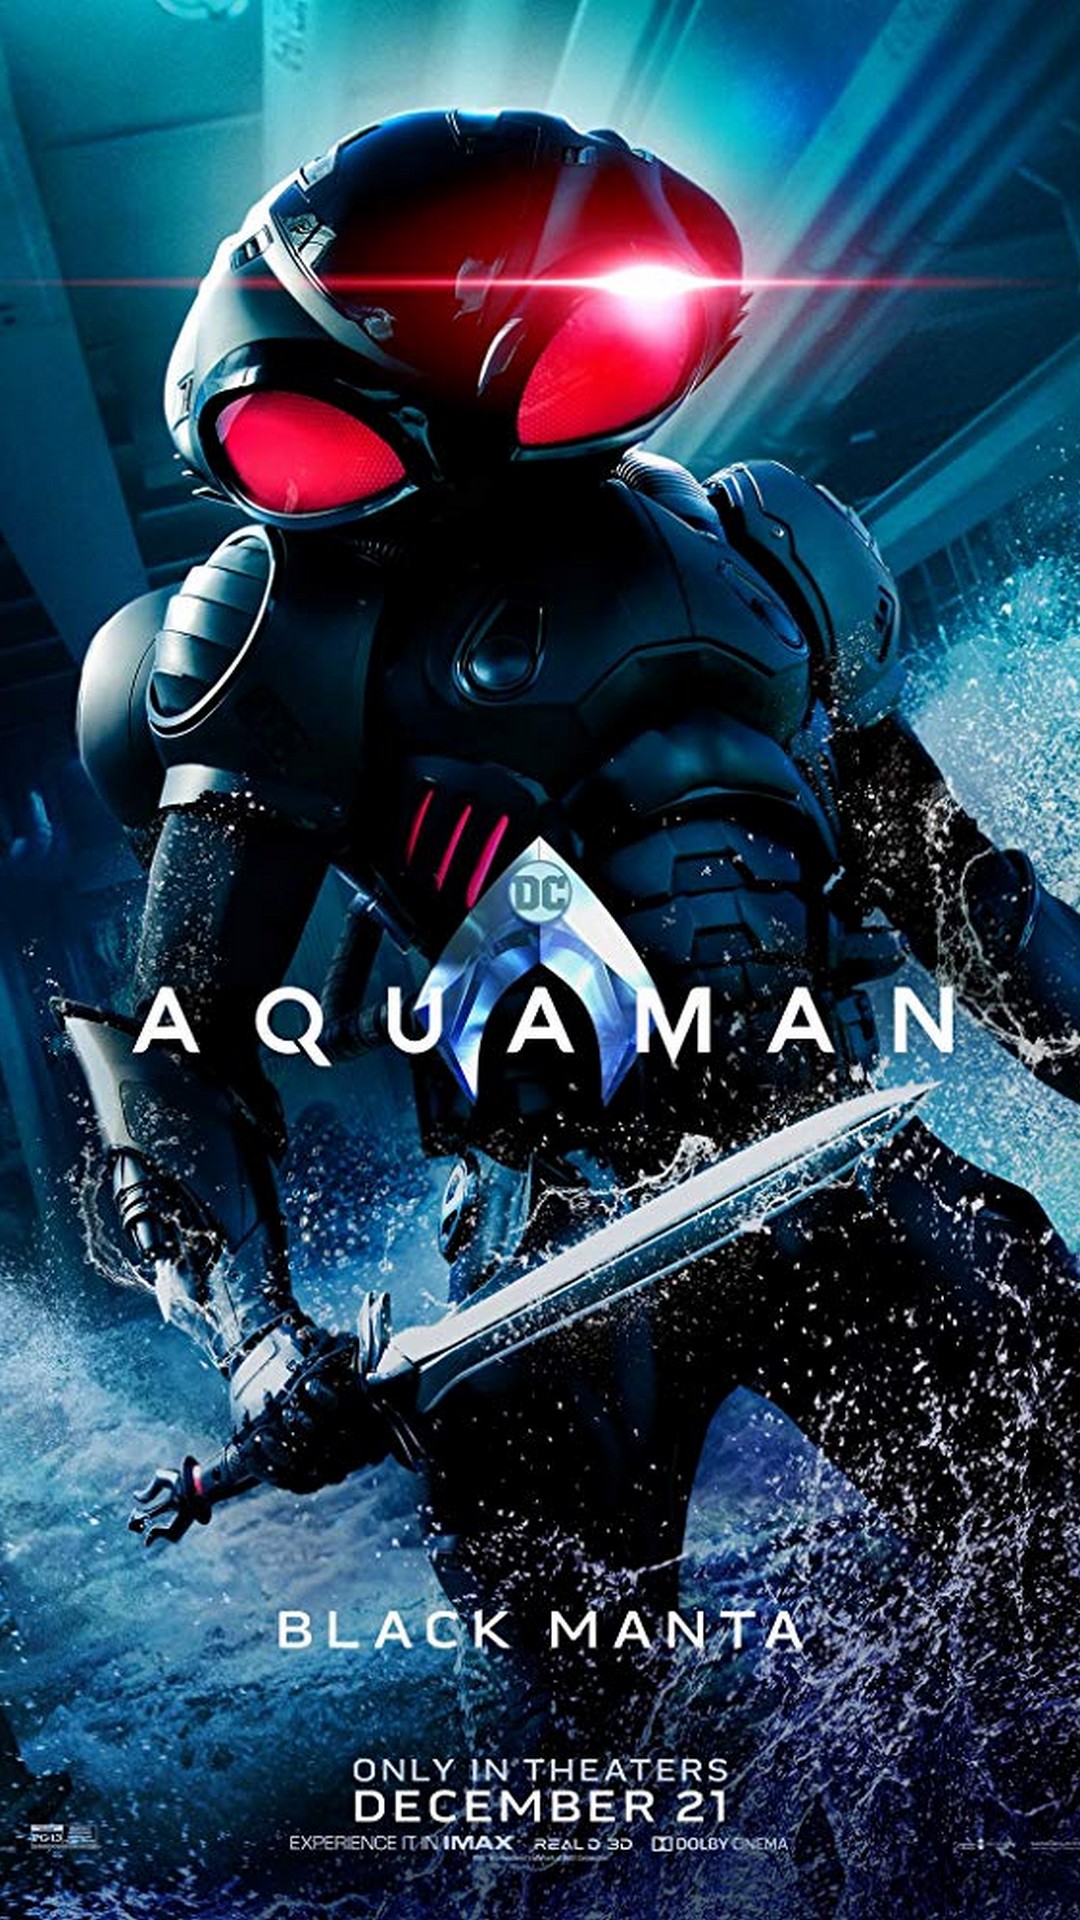 Aquaman 2018 HD Wallpaper For iPhone with resolution 1080X1920 pixel. You can use this wallpaper as background for your desktop Computer Screensavers, Android or iPhone smartphones